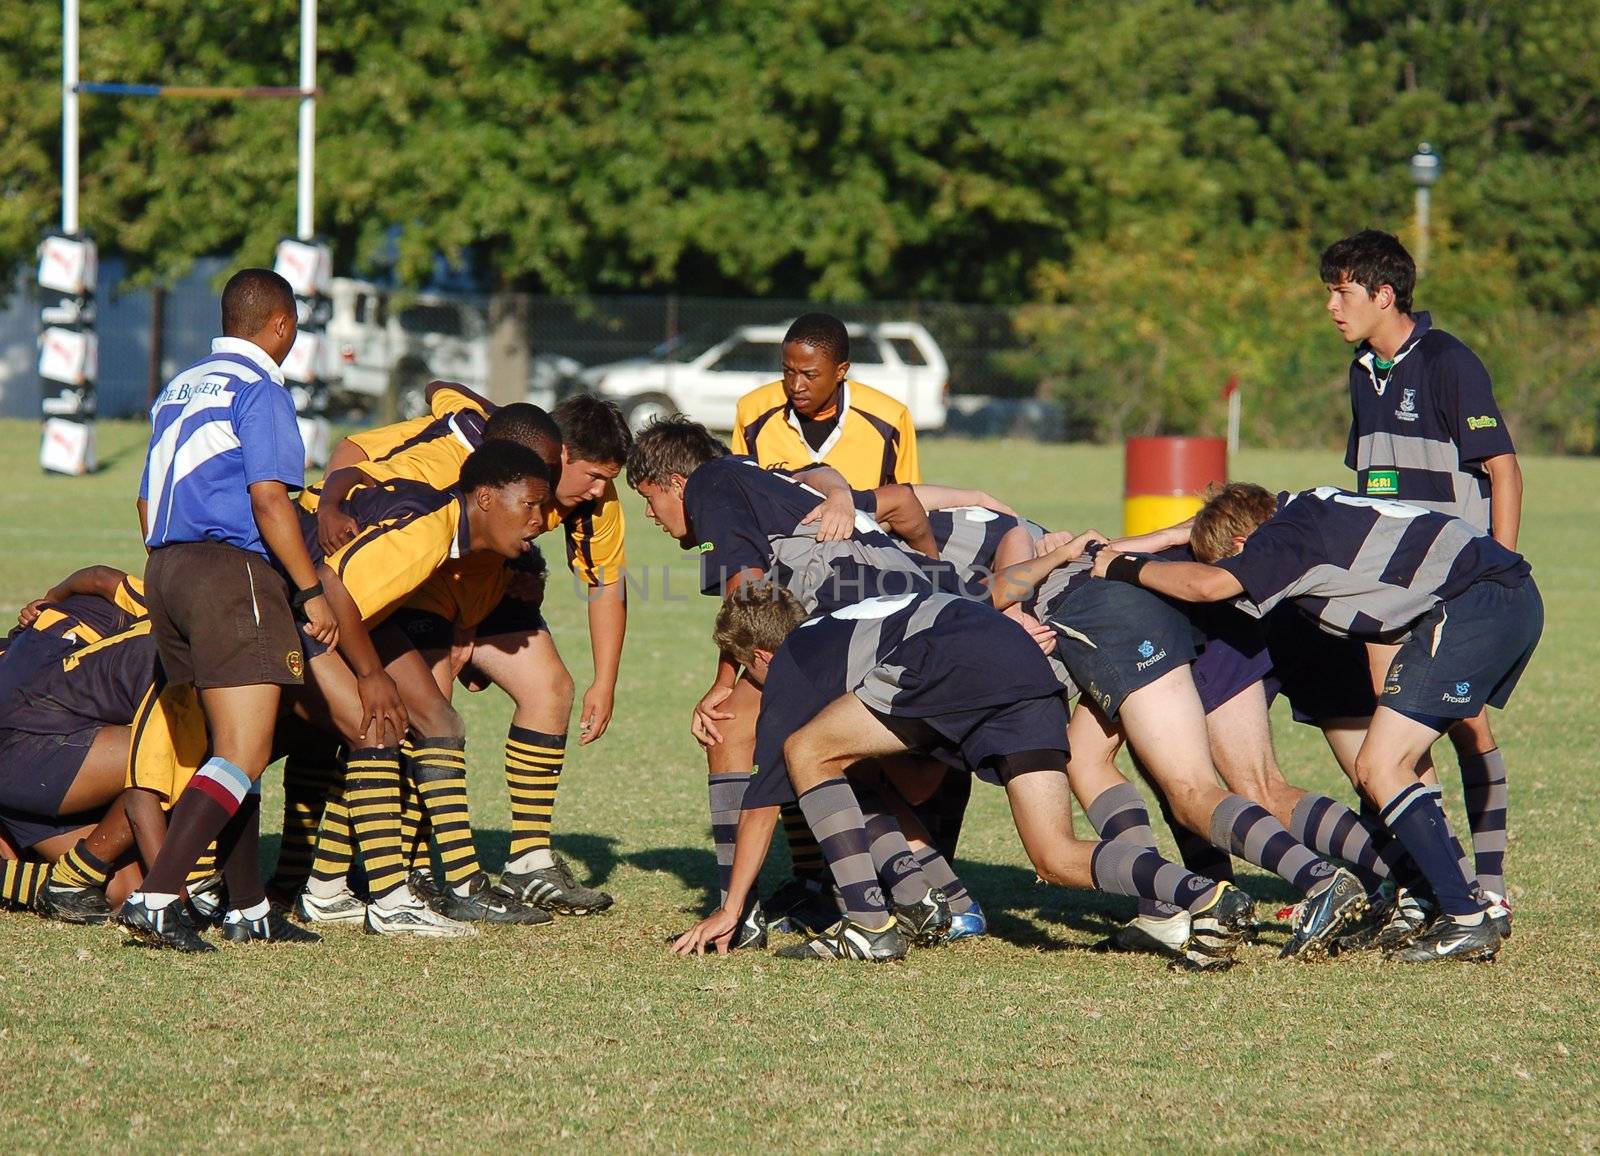 A scrum in a rugby football match between two school teams. (Editorial)